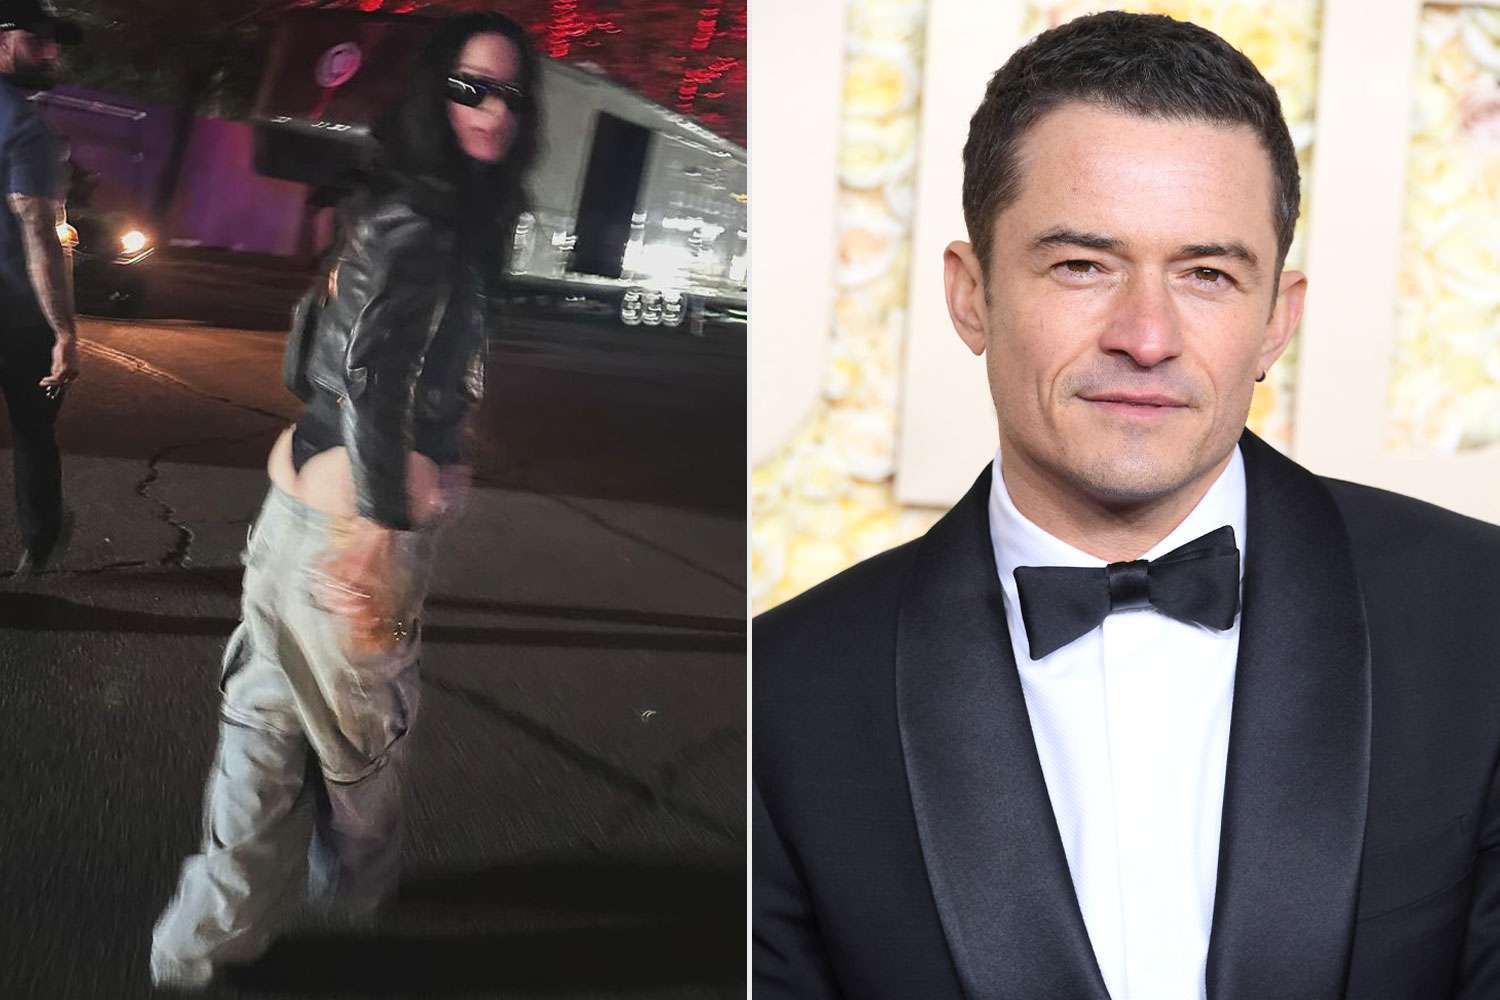 Orlando Bloom Teases Fiancée Katy Perry for Butt-Baring Coachella Look: 'Told Ya to Bring That Belt'